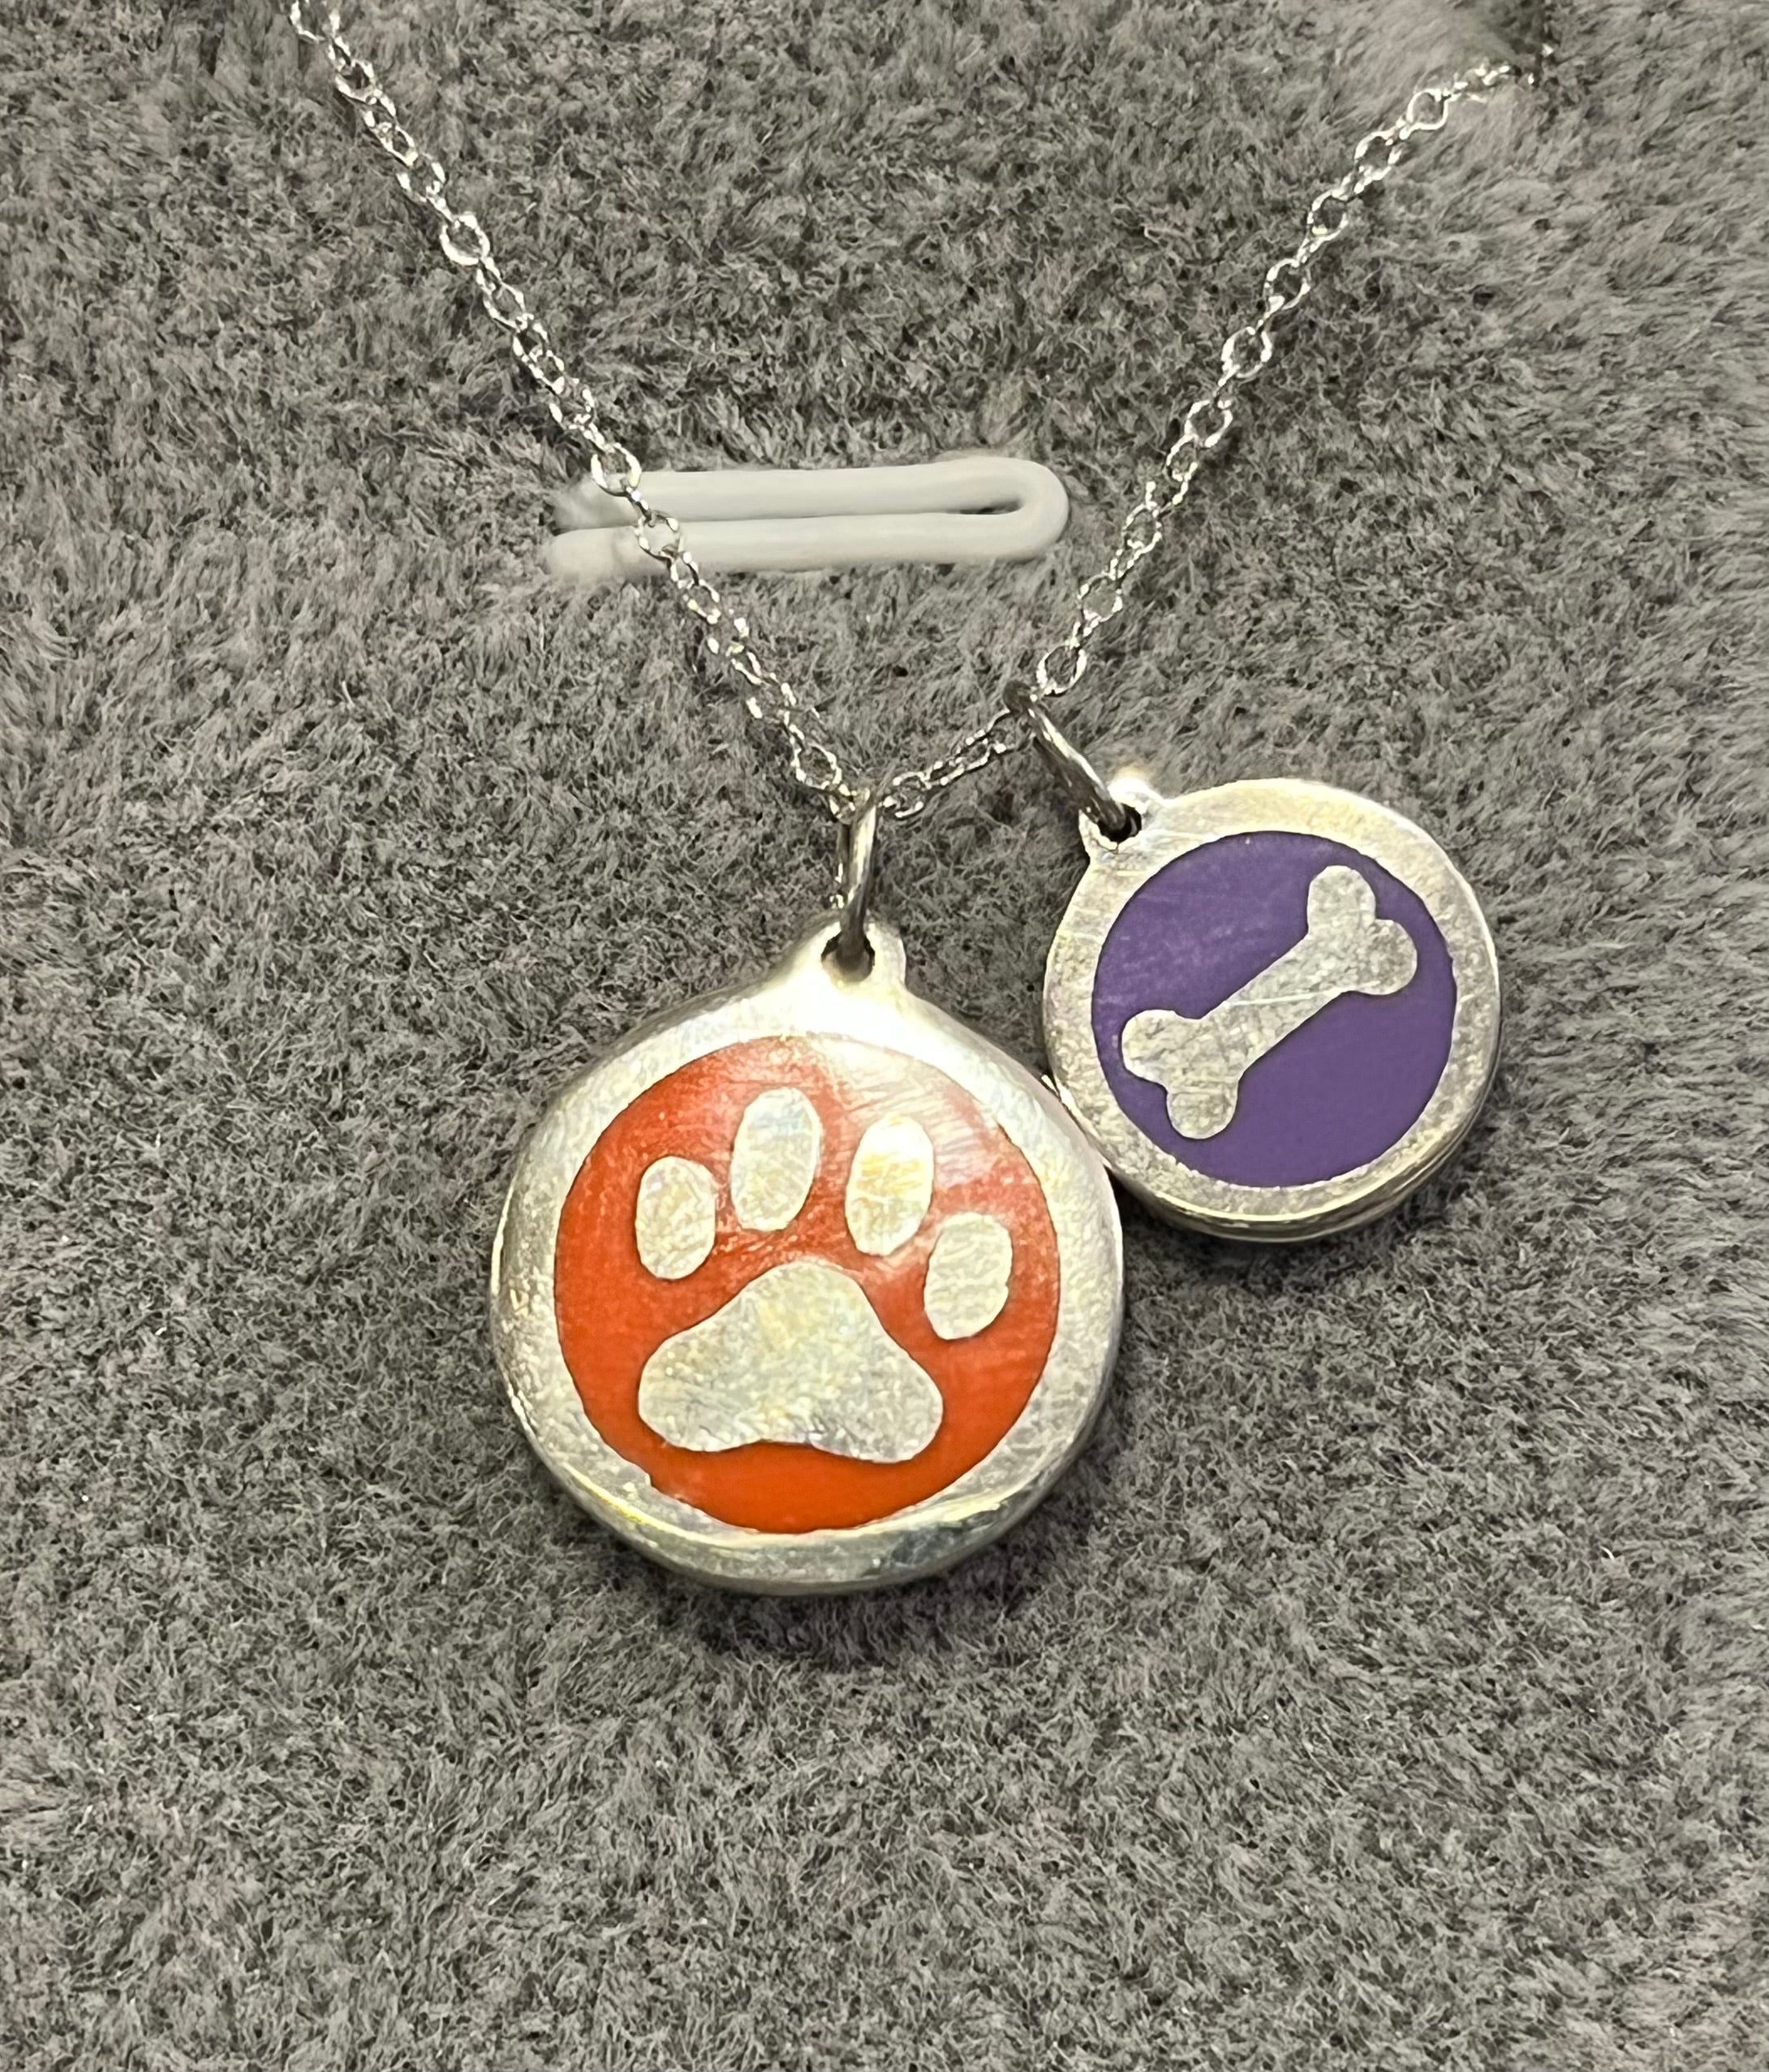 Silver Dog Paw and Bone Charm Necklace